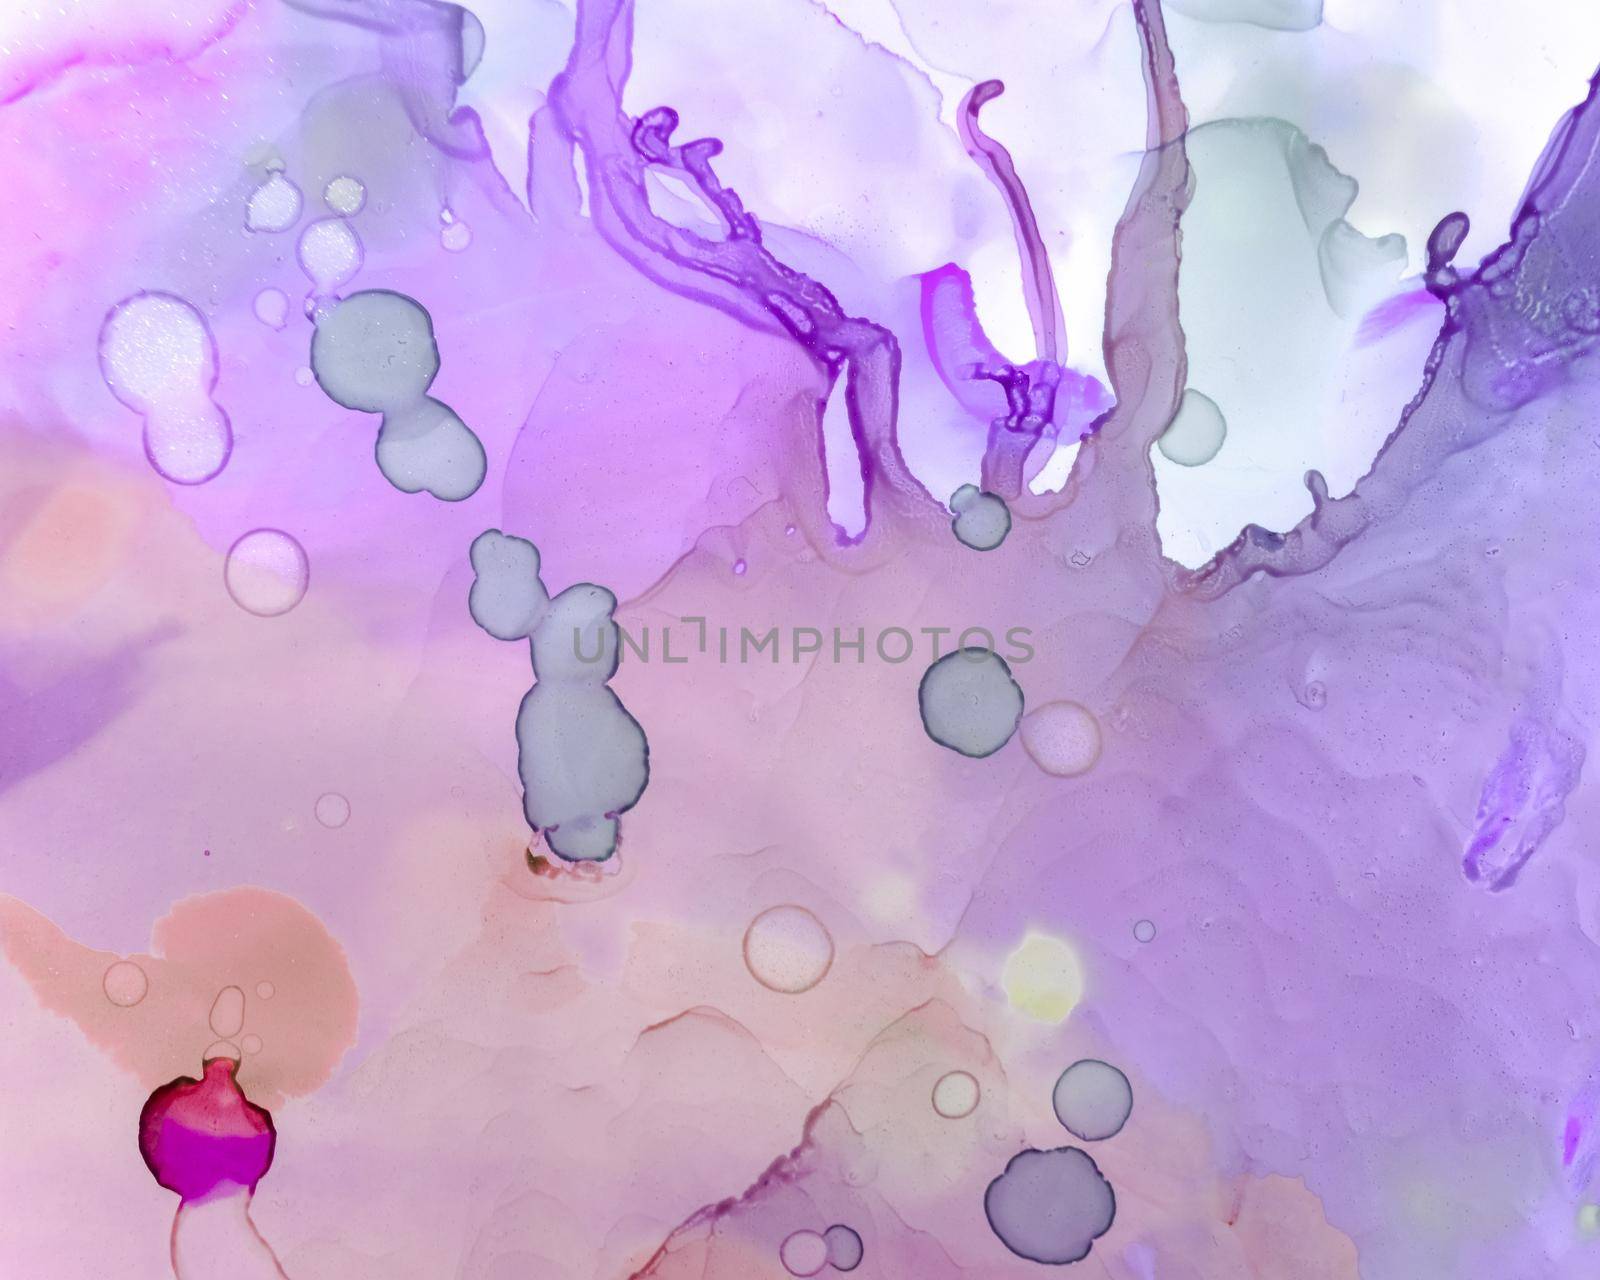 Ethereal Art Texture. Liquid Ink Wave Background. Purple Abstract Oil Splash. Sophisticated Flow Marble. Ethereal Art Pattern. Liquid Ink Wash Background. Mauve Ethereal Paint Texture.